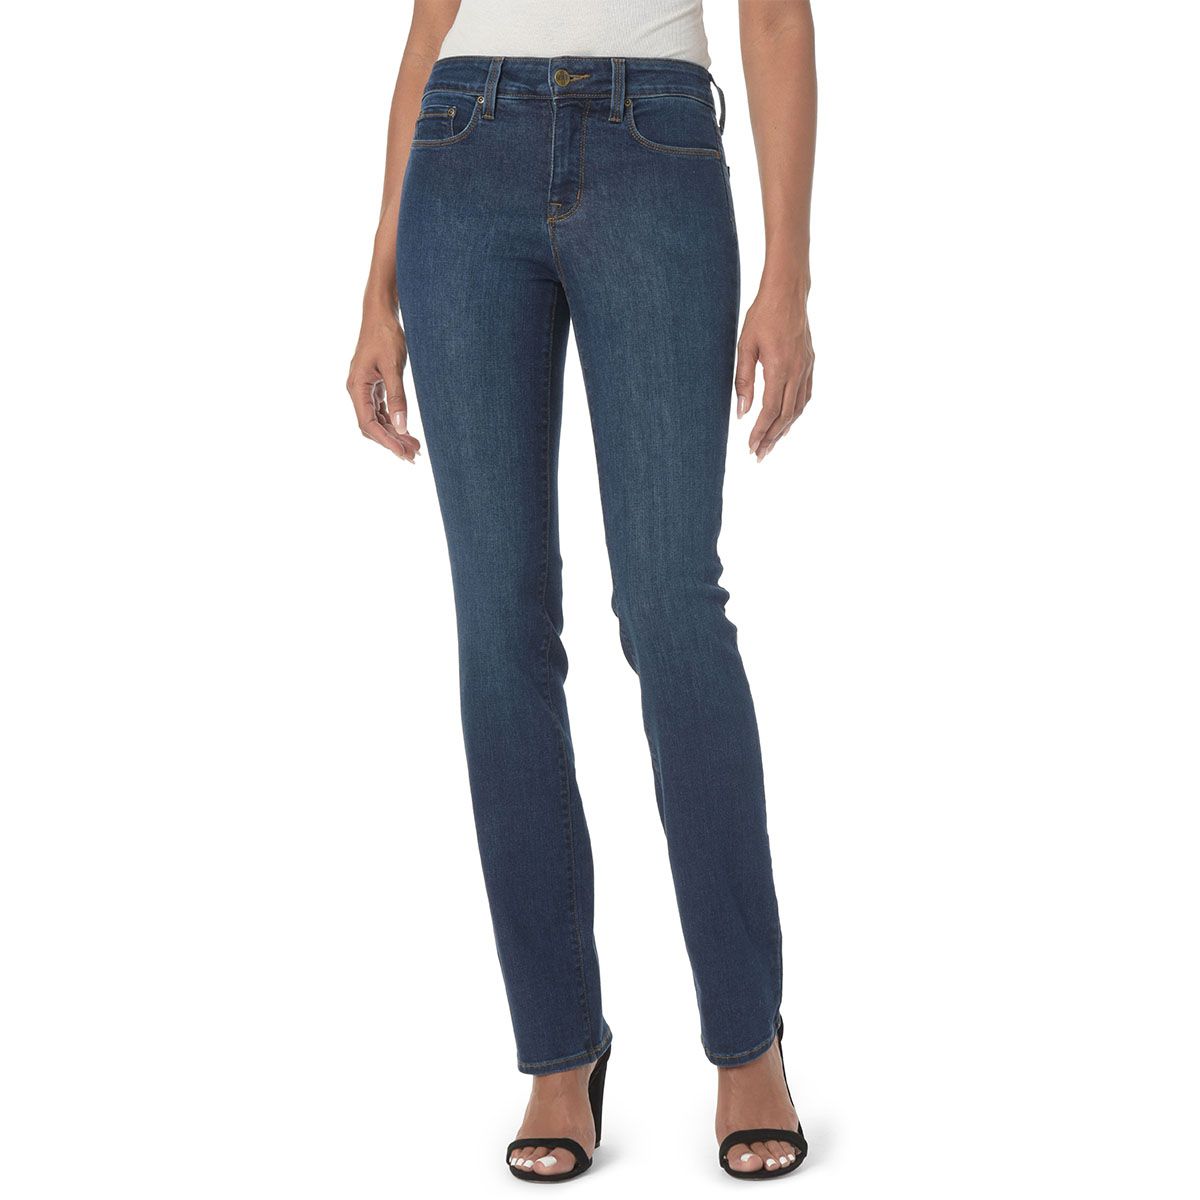 11 Best Jeans for Tall Women: Madewell, Frame, NYDJ, and More | InStyle